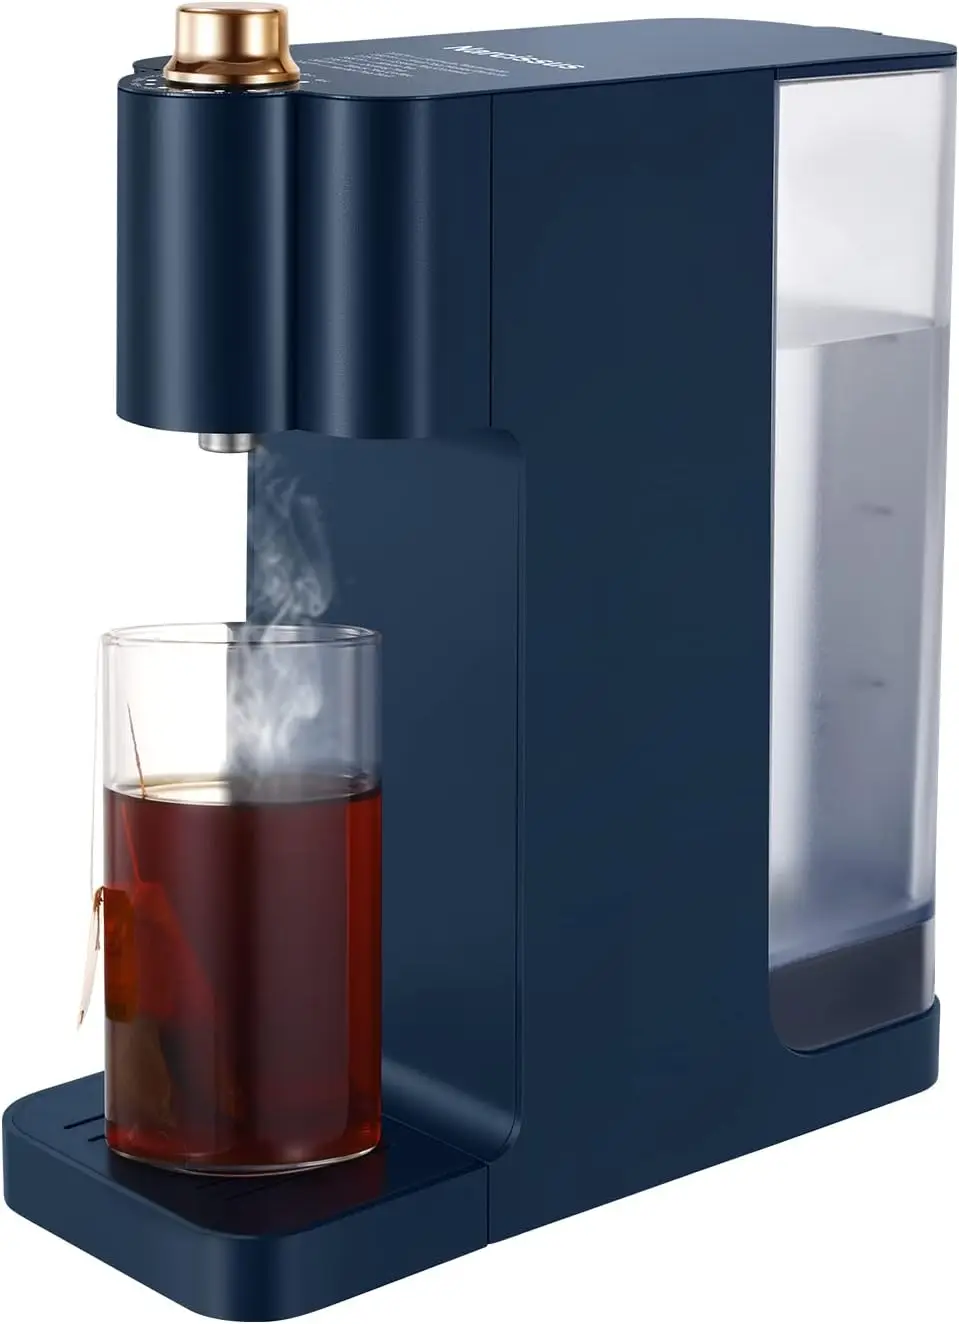 

Kettles, A11 Instant Hot Water Dispenser for Quick Heating & Outputting, Adjustable 7 Temperatures & 3 Water Outputs, 40